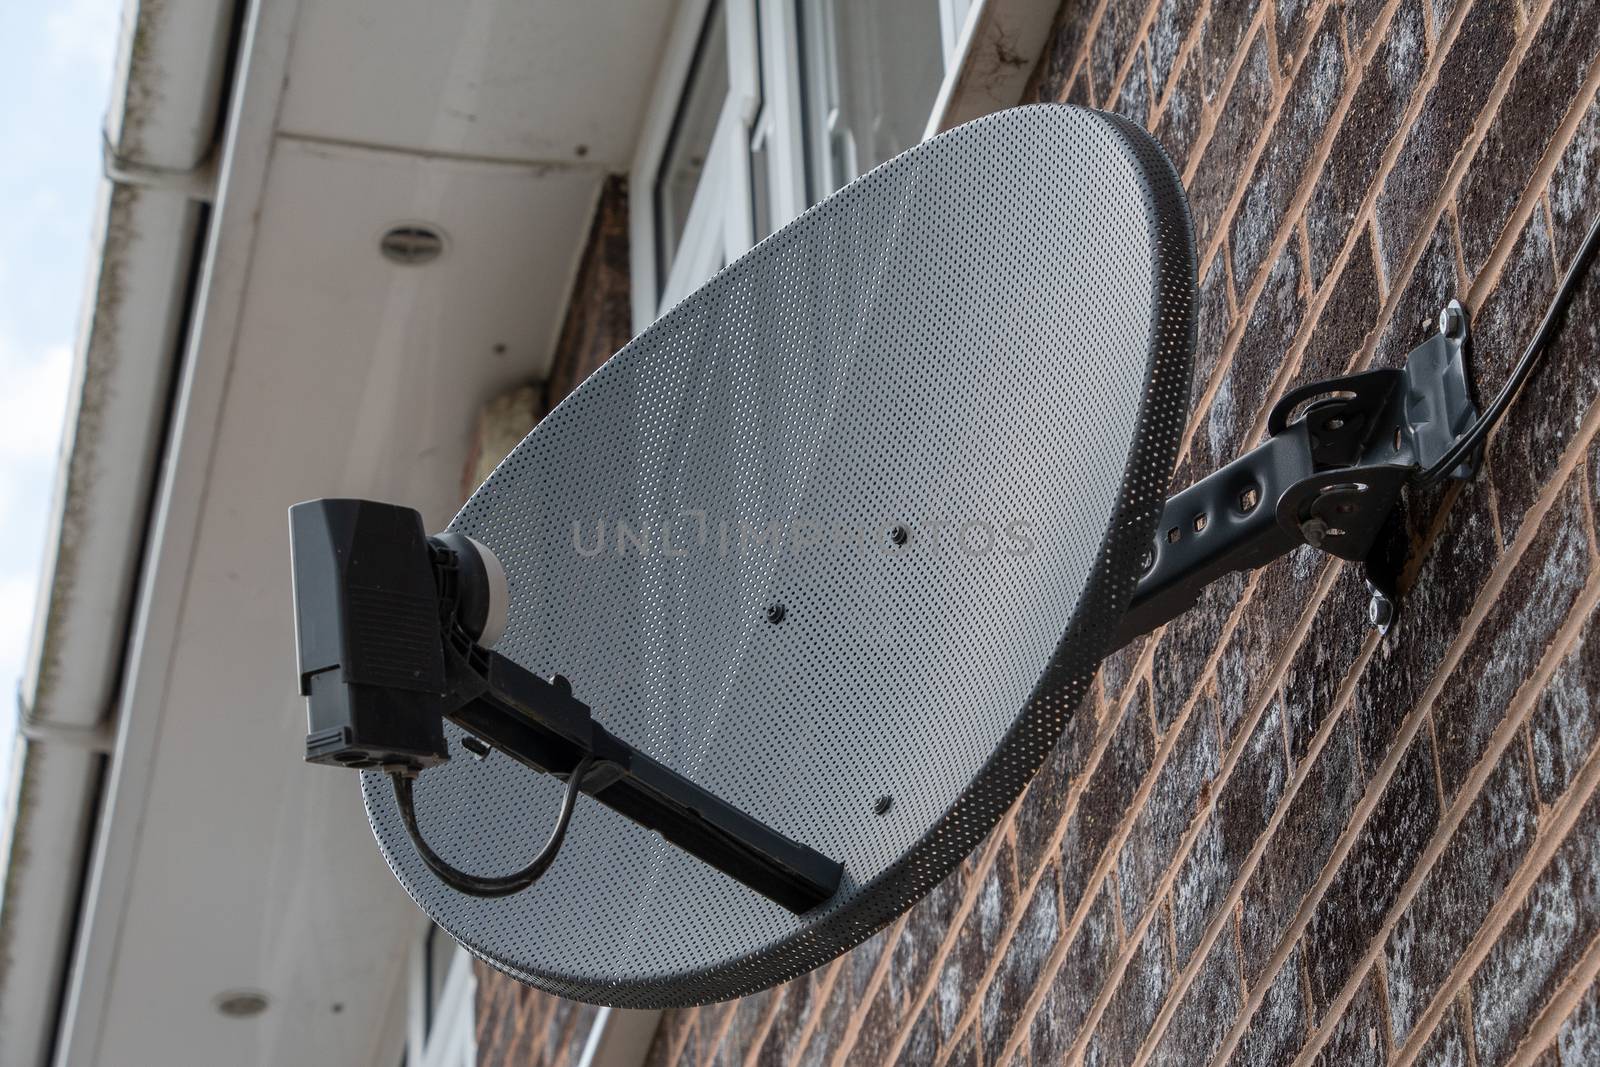 TV satellite disk mounted on a brick wall by Russell102